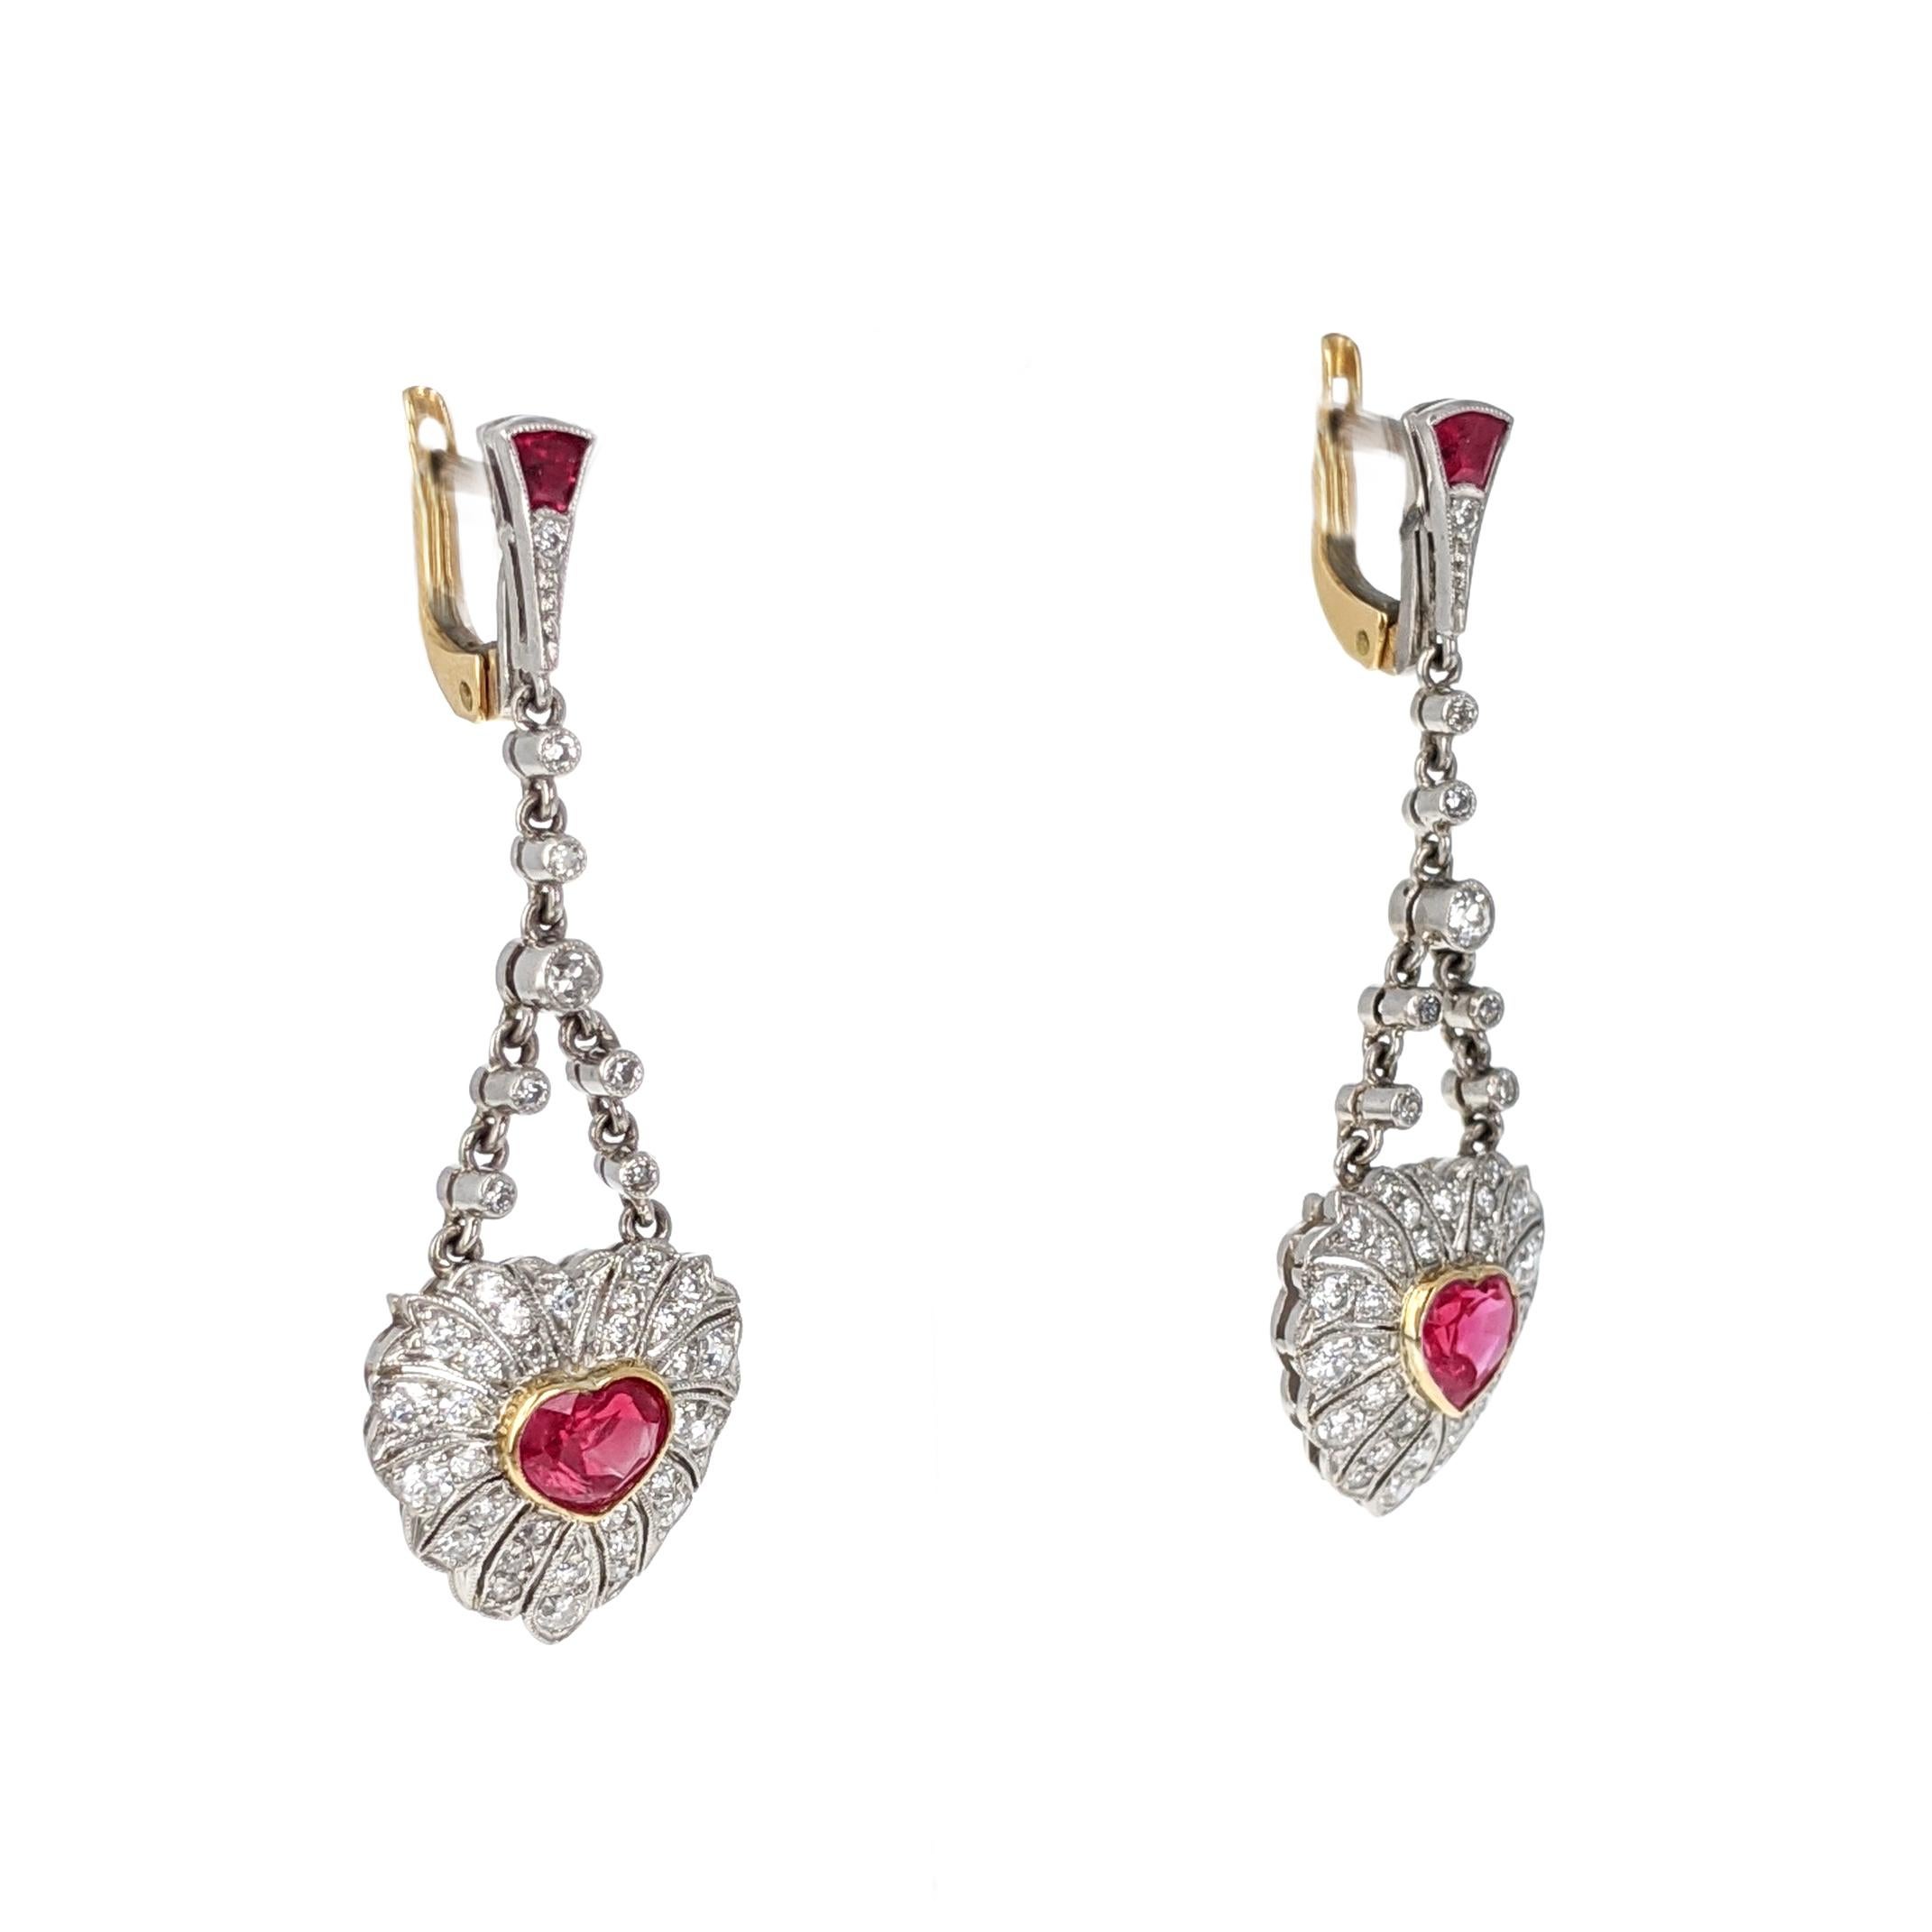 Each of these sweet dangle earrings centers upon a heart shaped ruby, surrounded by single cut diamonds in an openwork design. They are expertly crafted in yellow gold and platinum with delicate milgrain detailing. Each measures approximately 1.5